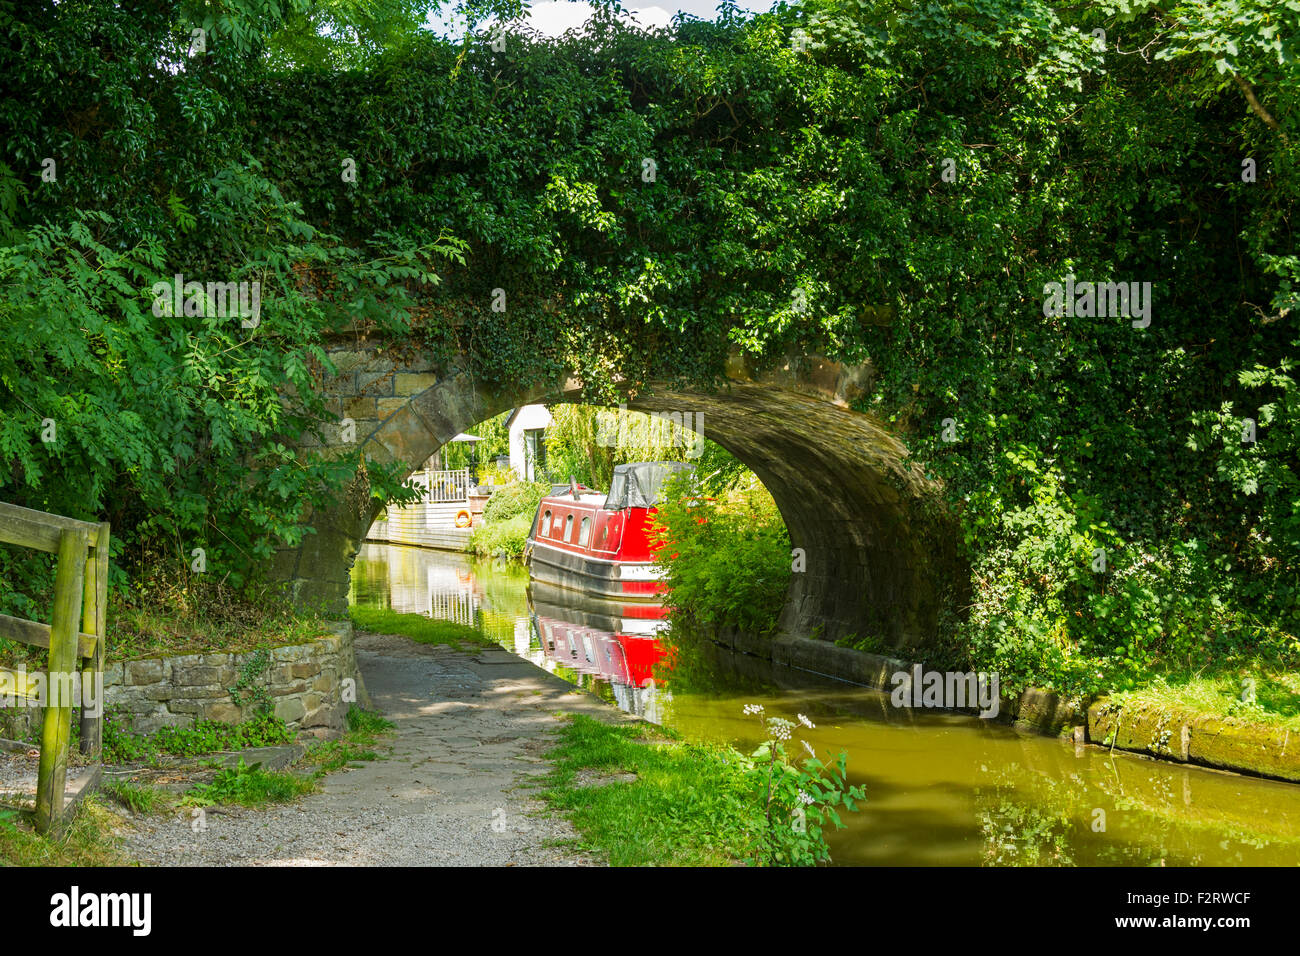 Narrowboat and bridge on the Macclesfield canal at Marple, Greater Manchester, England, UK. Stock Photo